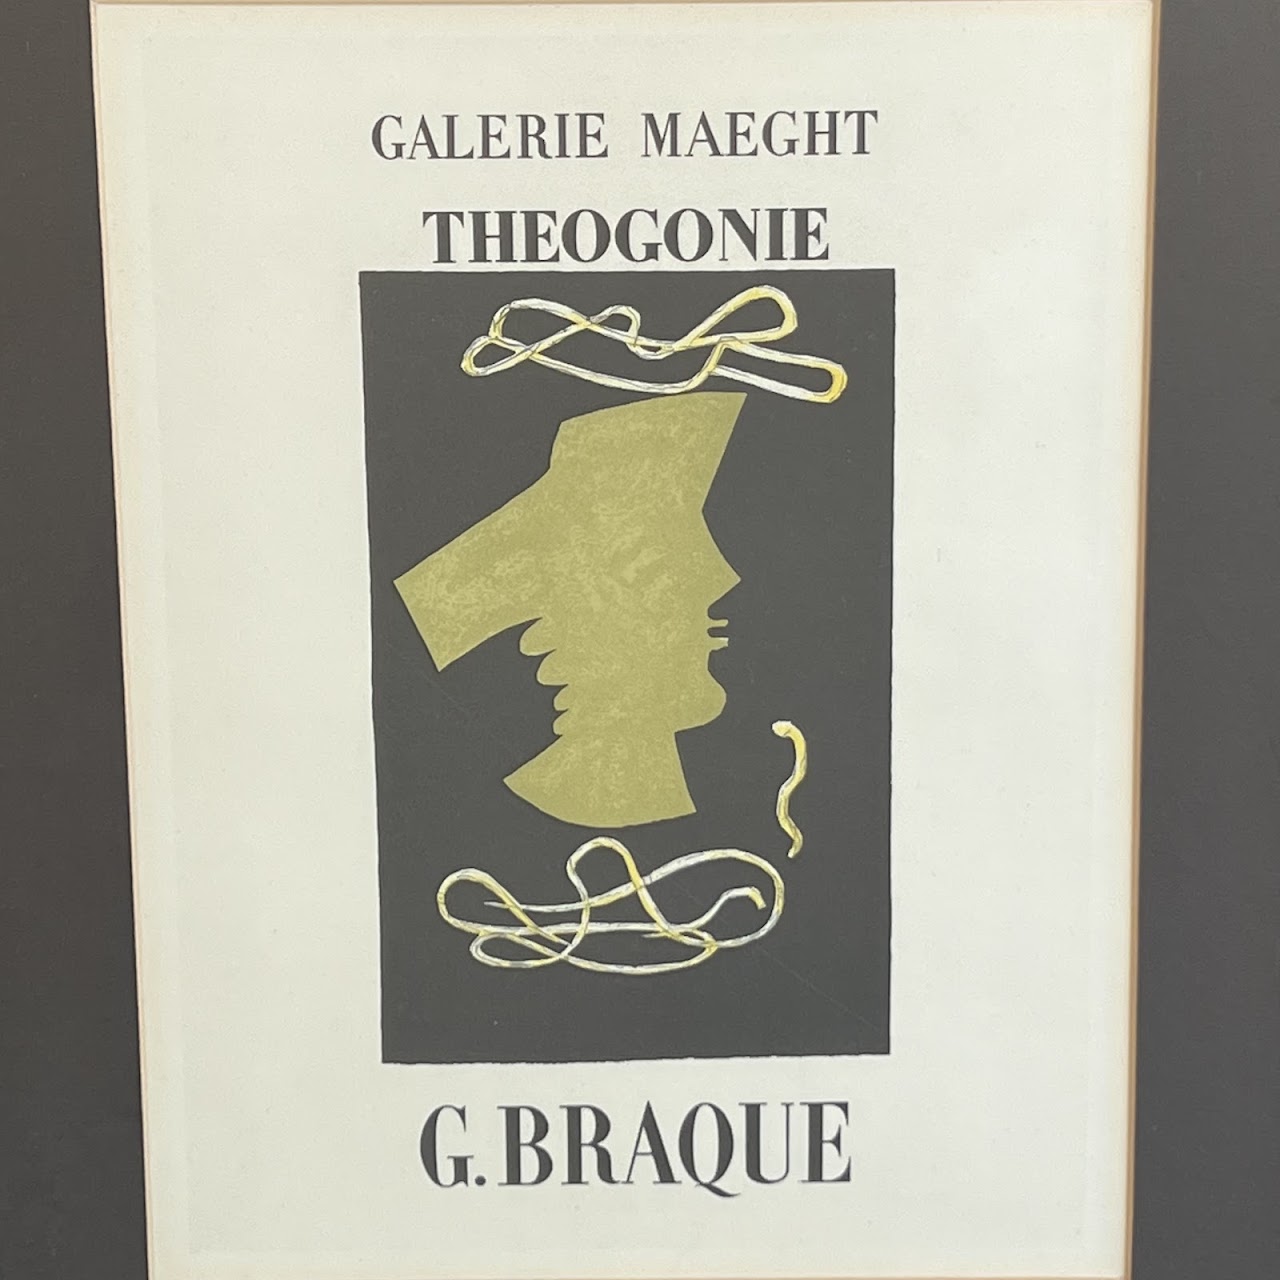 Georges Braque 'Théogonie' Galerie Maeght Mourlot Lithograph Bookplate, 1959